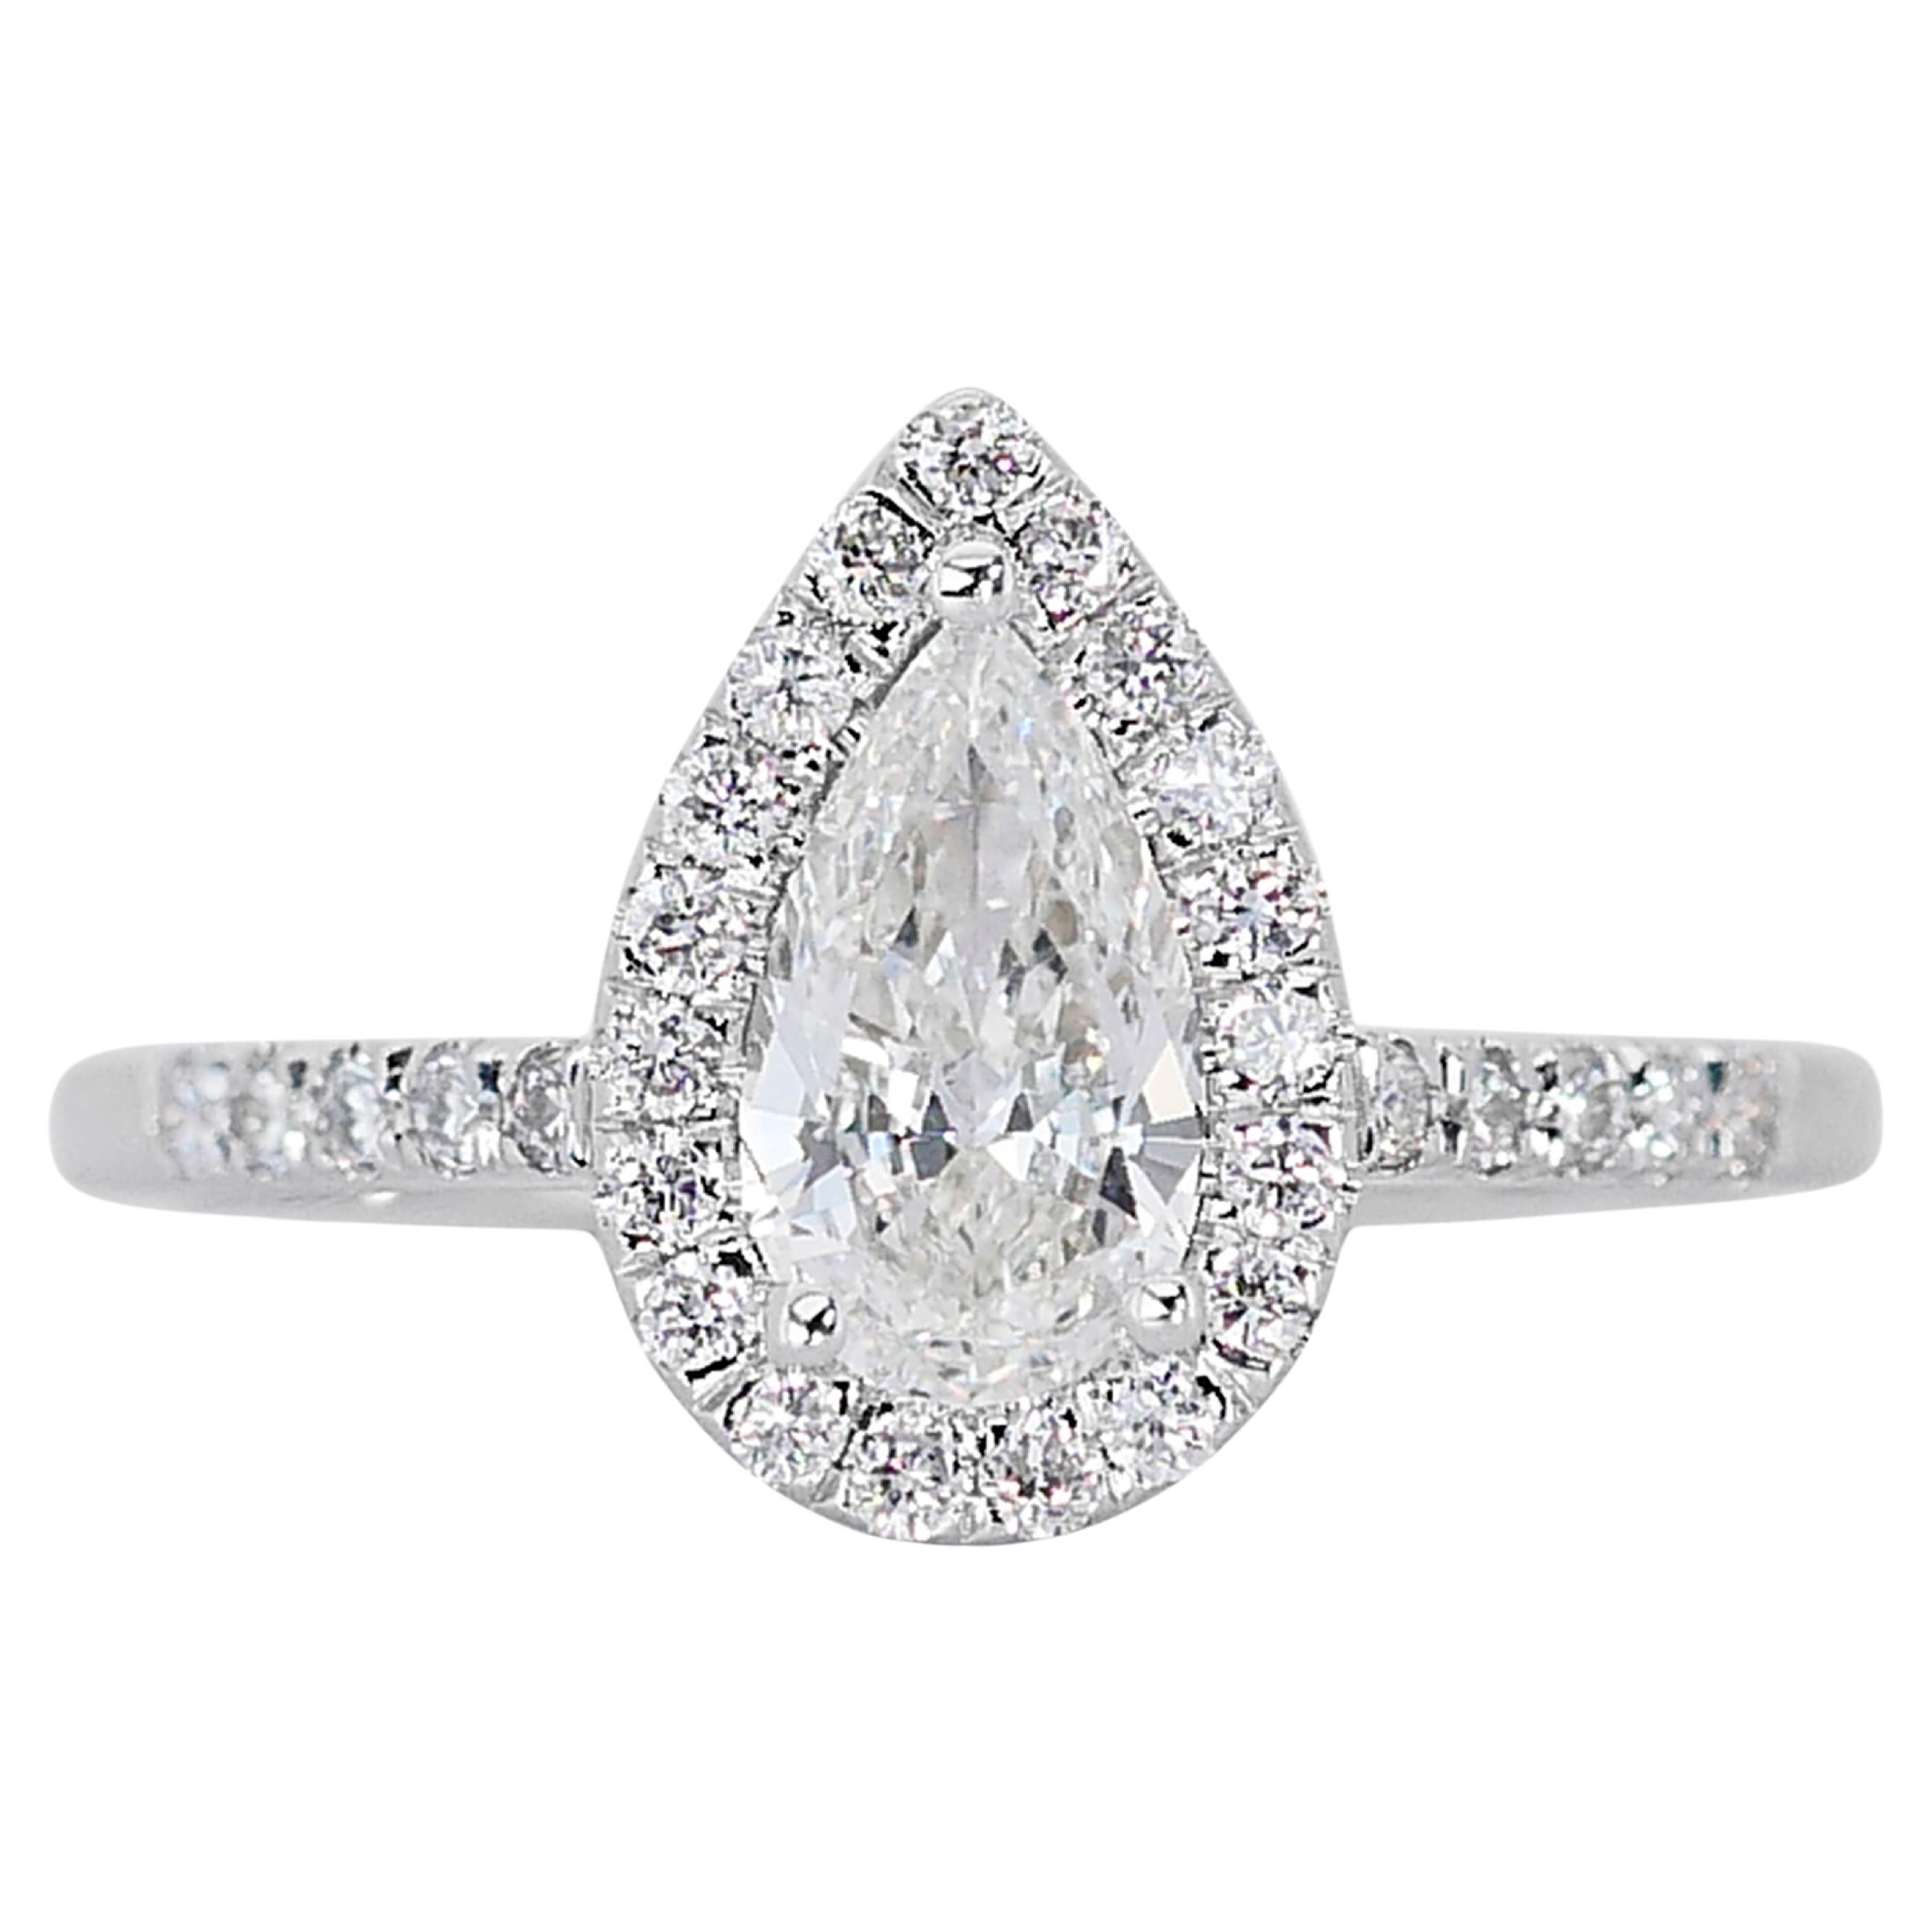 Stunning 1.97ct Pear-Shaped Diamond Halo Ring in 18k White Gold - GIA Certified For Sale